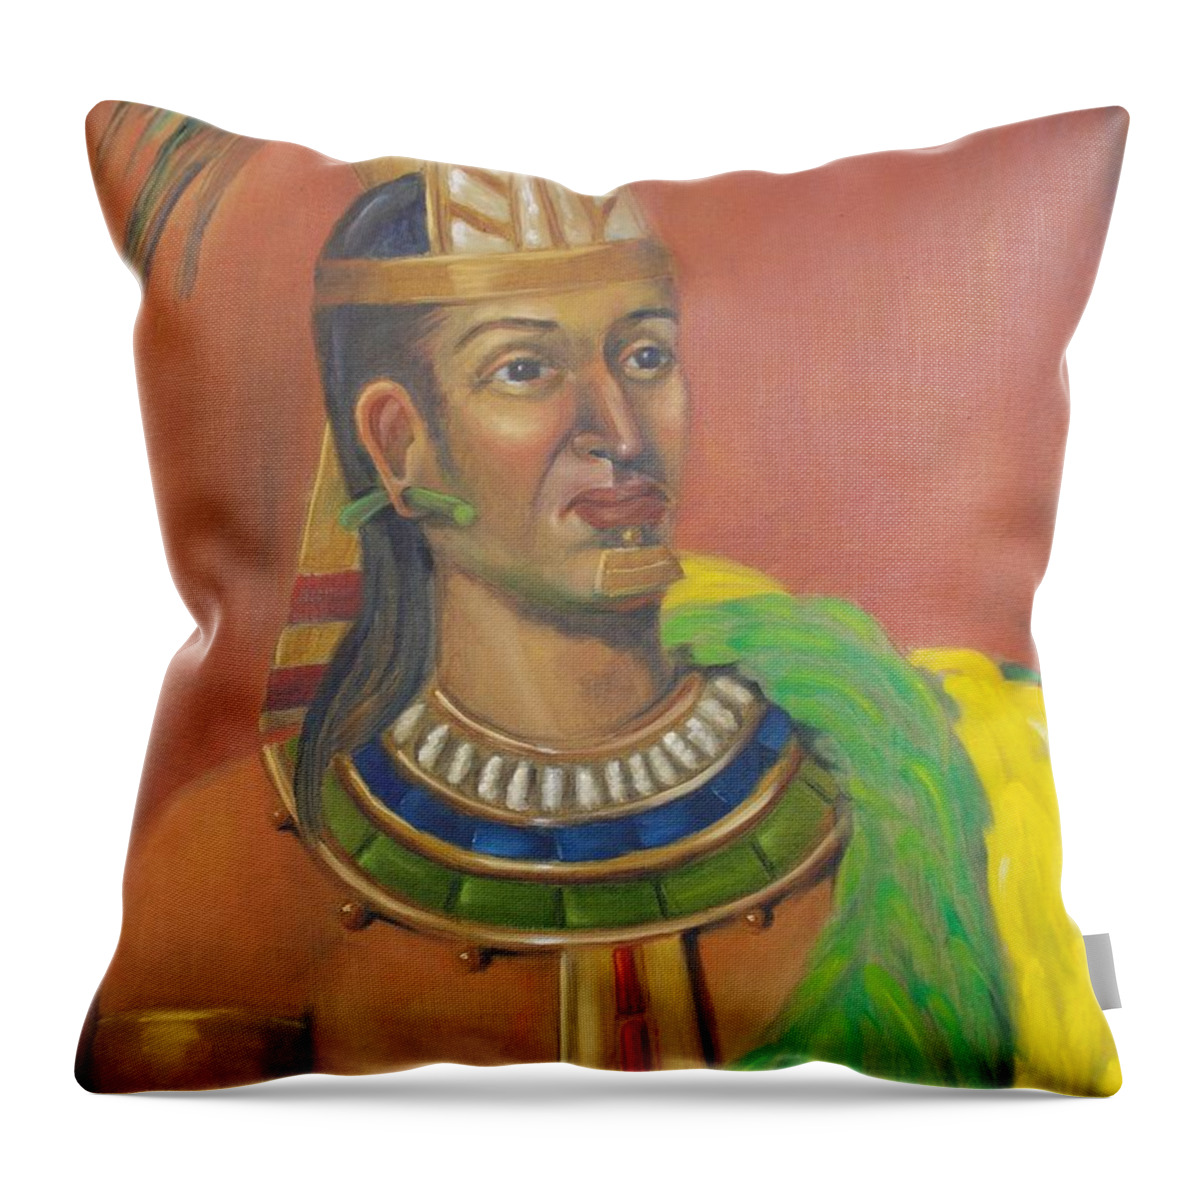 Aztec Throw Pillow featuring the painting King Topiltzin by Lilibeth Andre